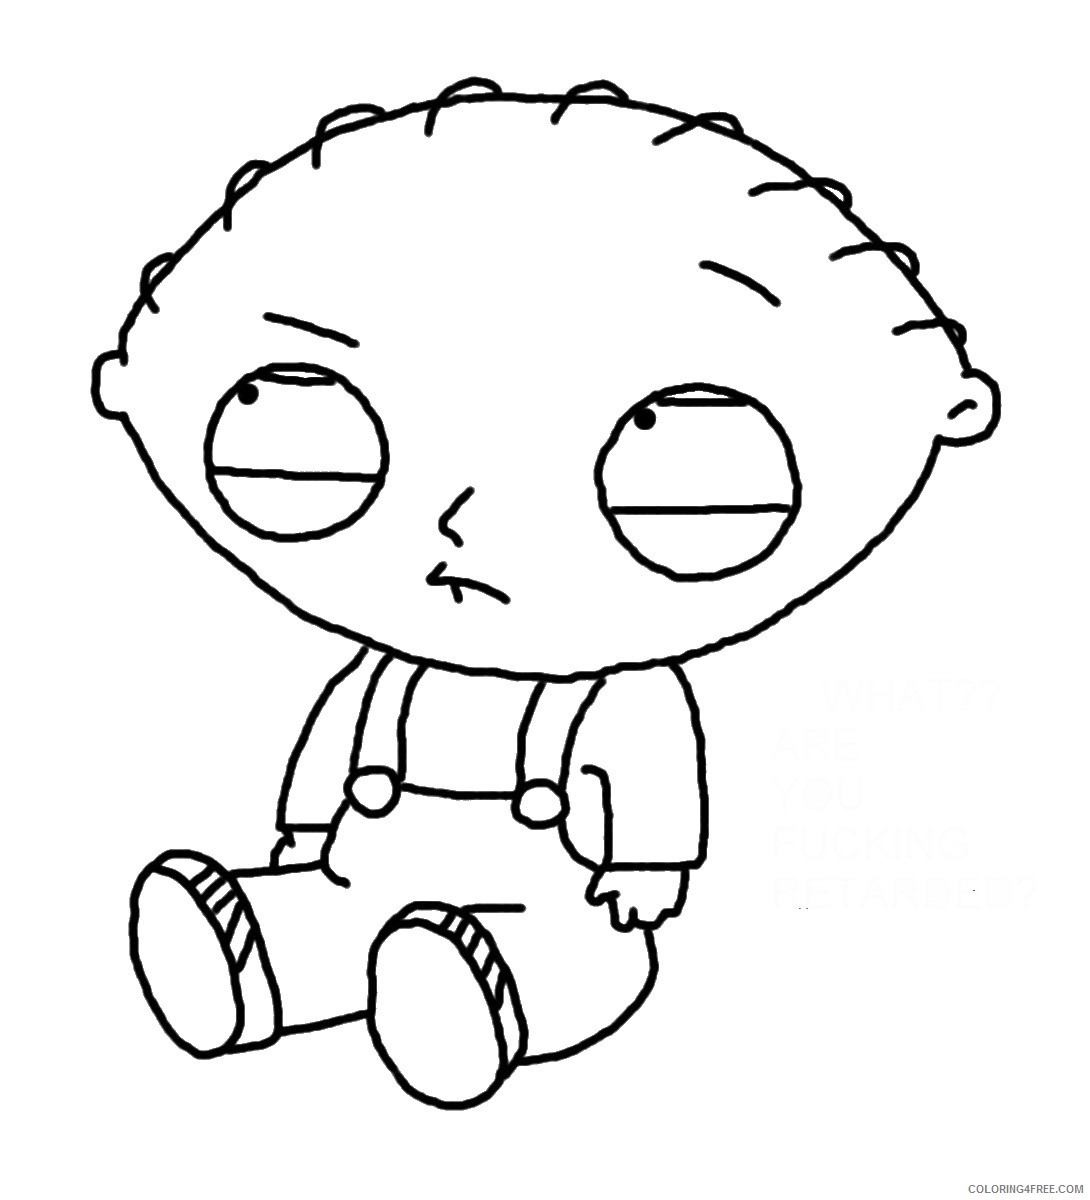 stewie griffin family guy coloring pages Coloring4free